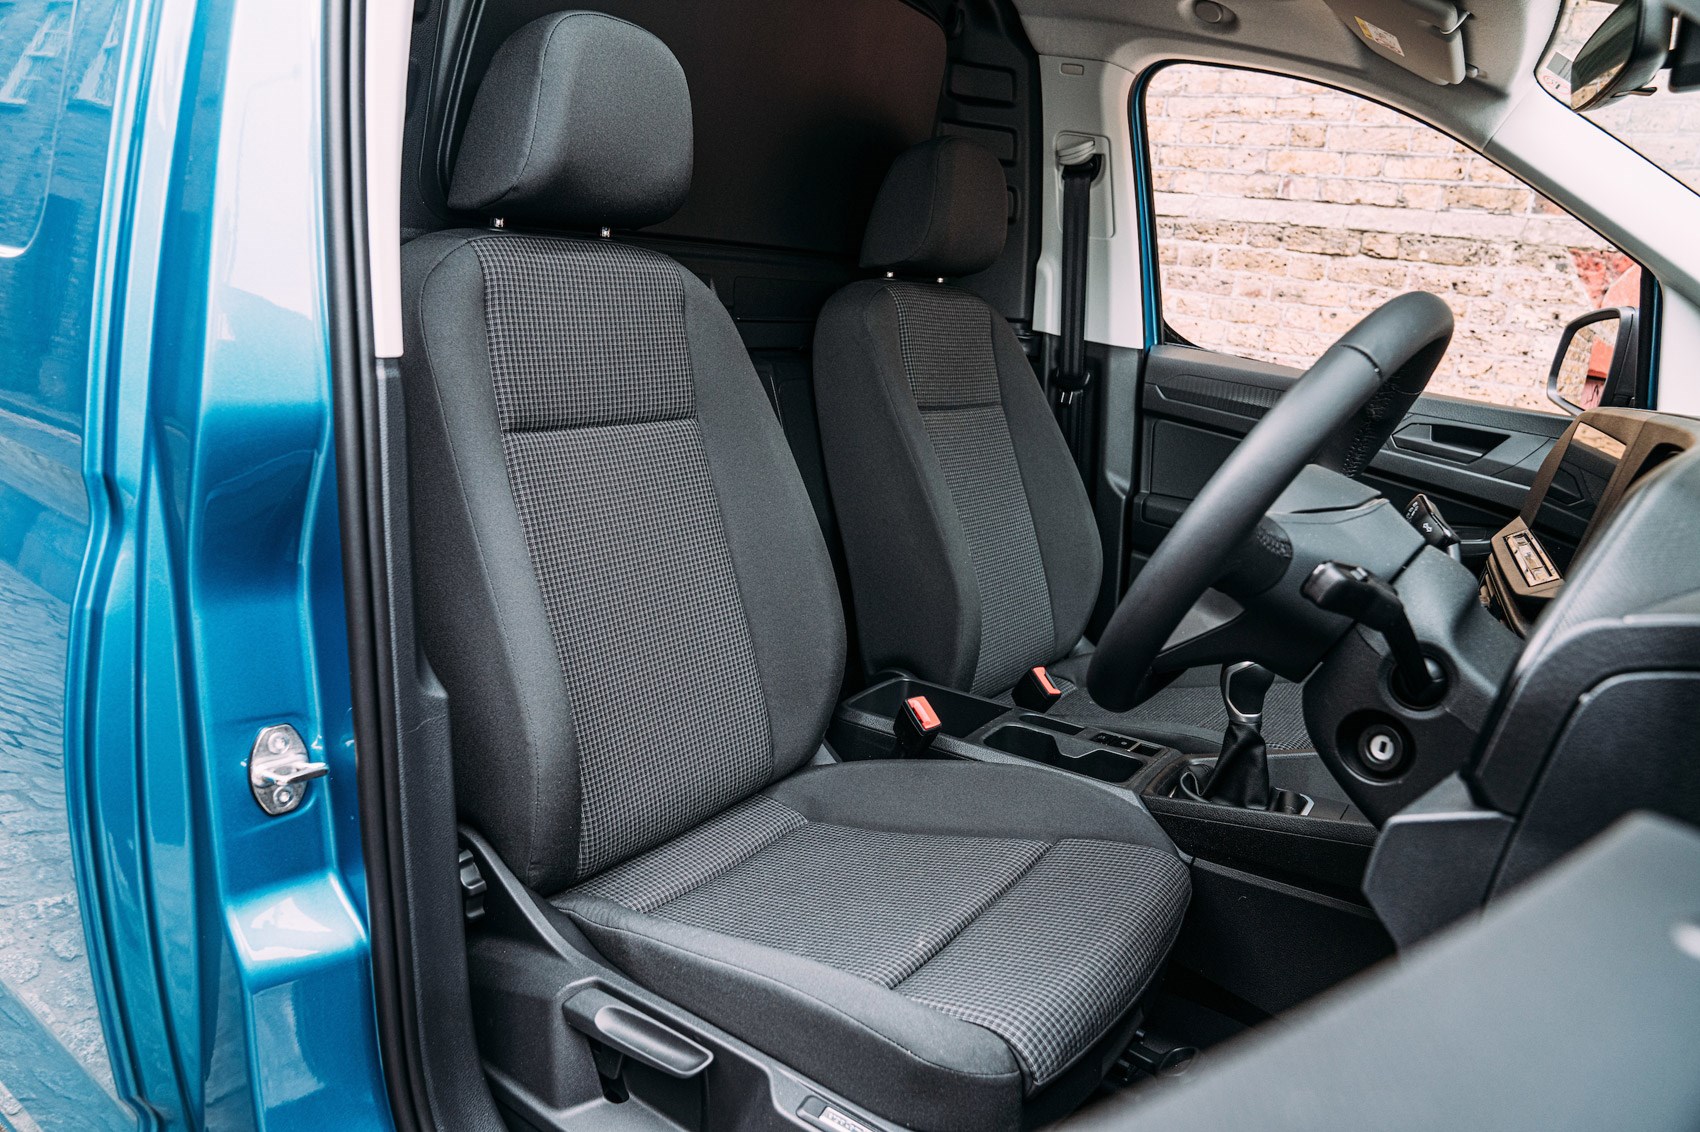 VW Caddy Cargo review, 2021, cab interior, right-hand drive, steering wheel, dashboard, screen